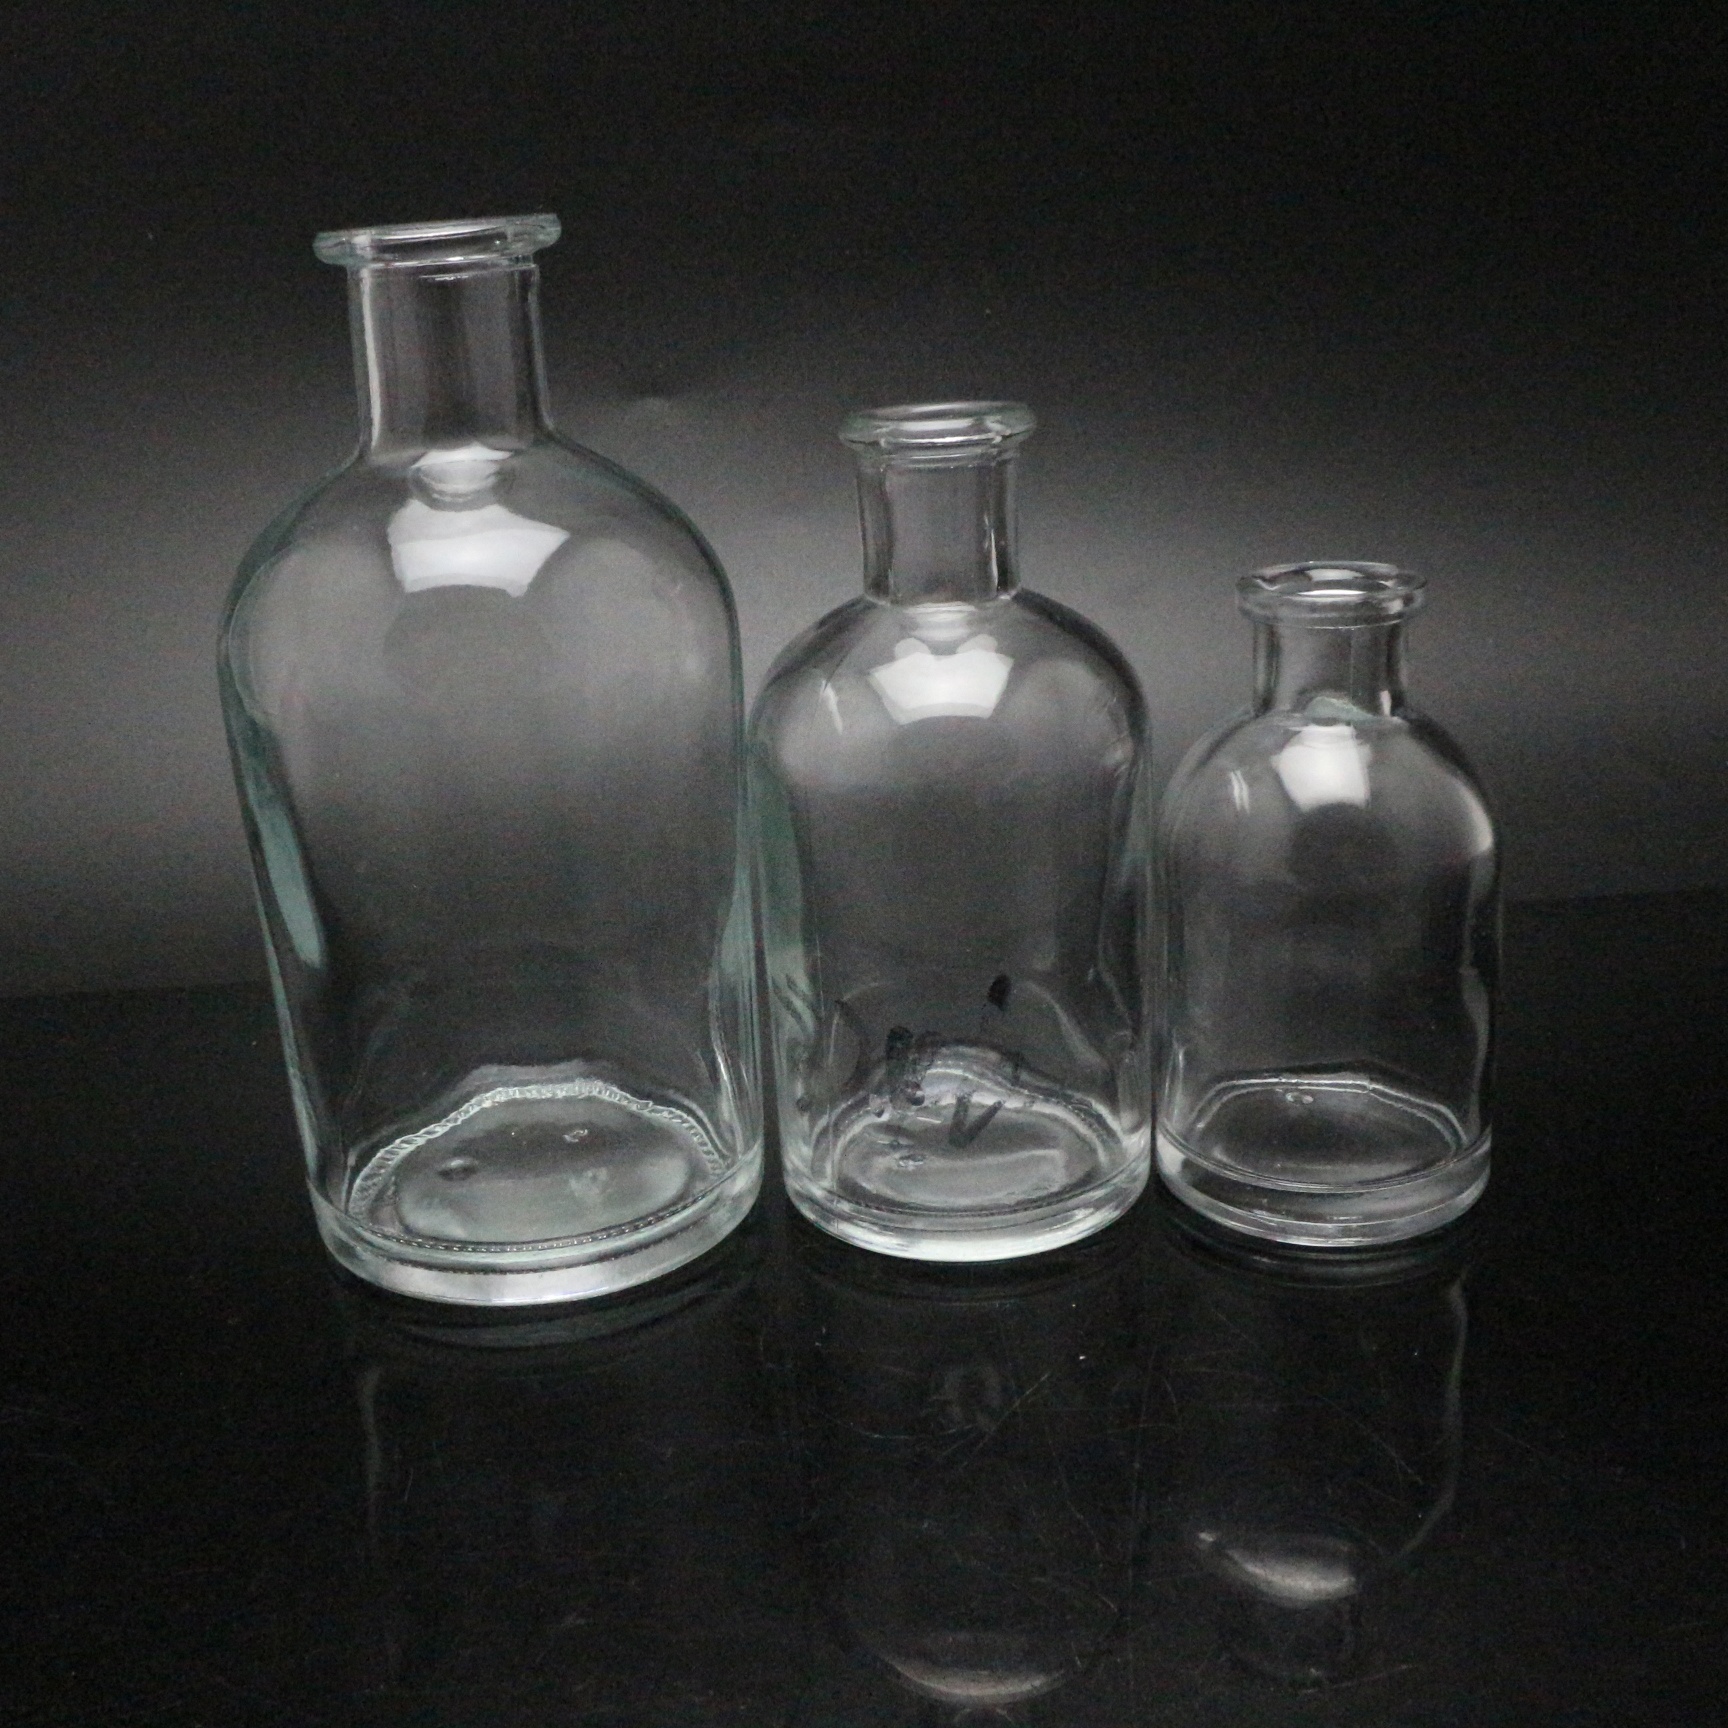 Diffuser Bottles - 200ml Clear Glass Round Diffuser Bottle